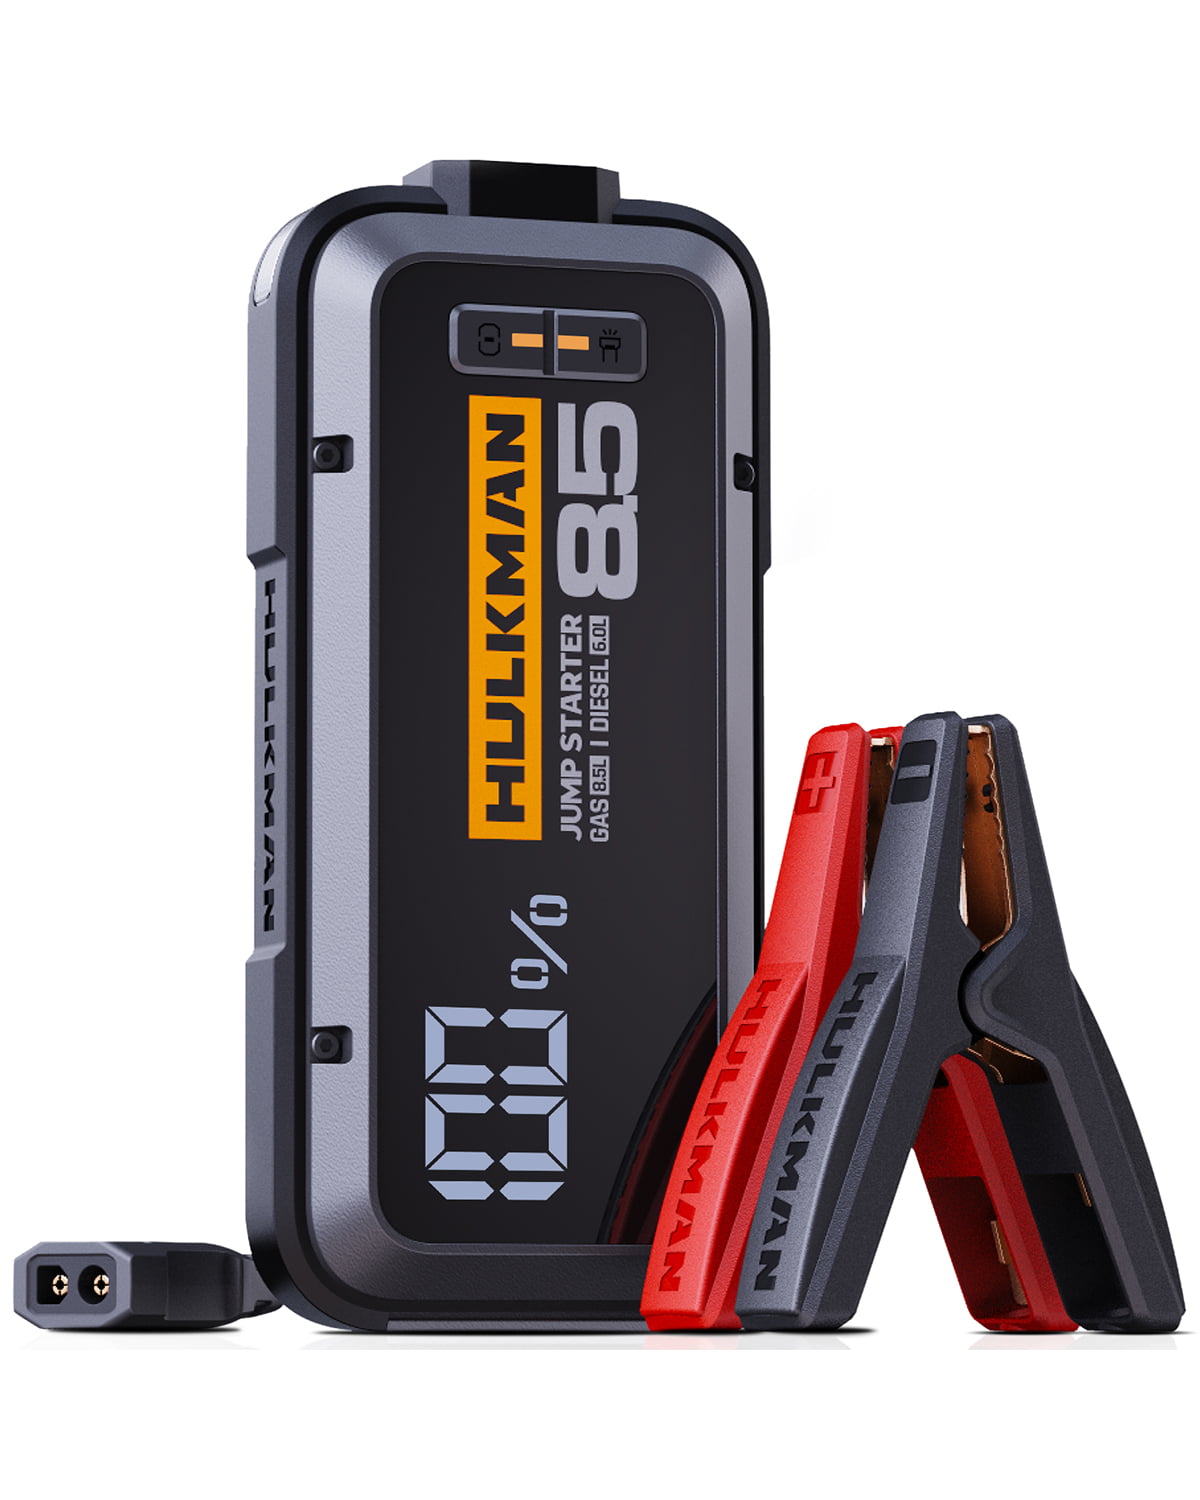 6.0L Diesel Engines with LCD Display 12V Lithium Portable Car Battery Booster Pack Rosfim 2000A Peak Car Jump Starter 20000mAh Car Starter for up to 8.0L Gas 